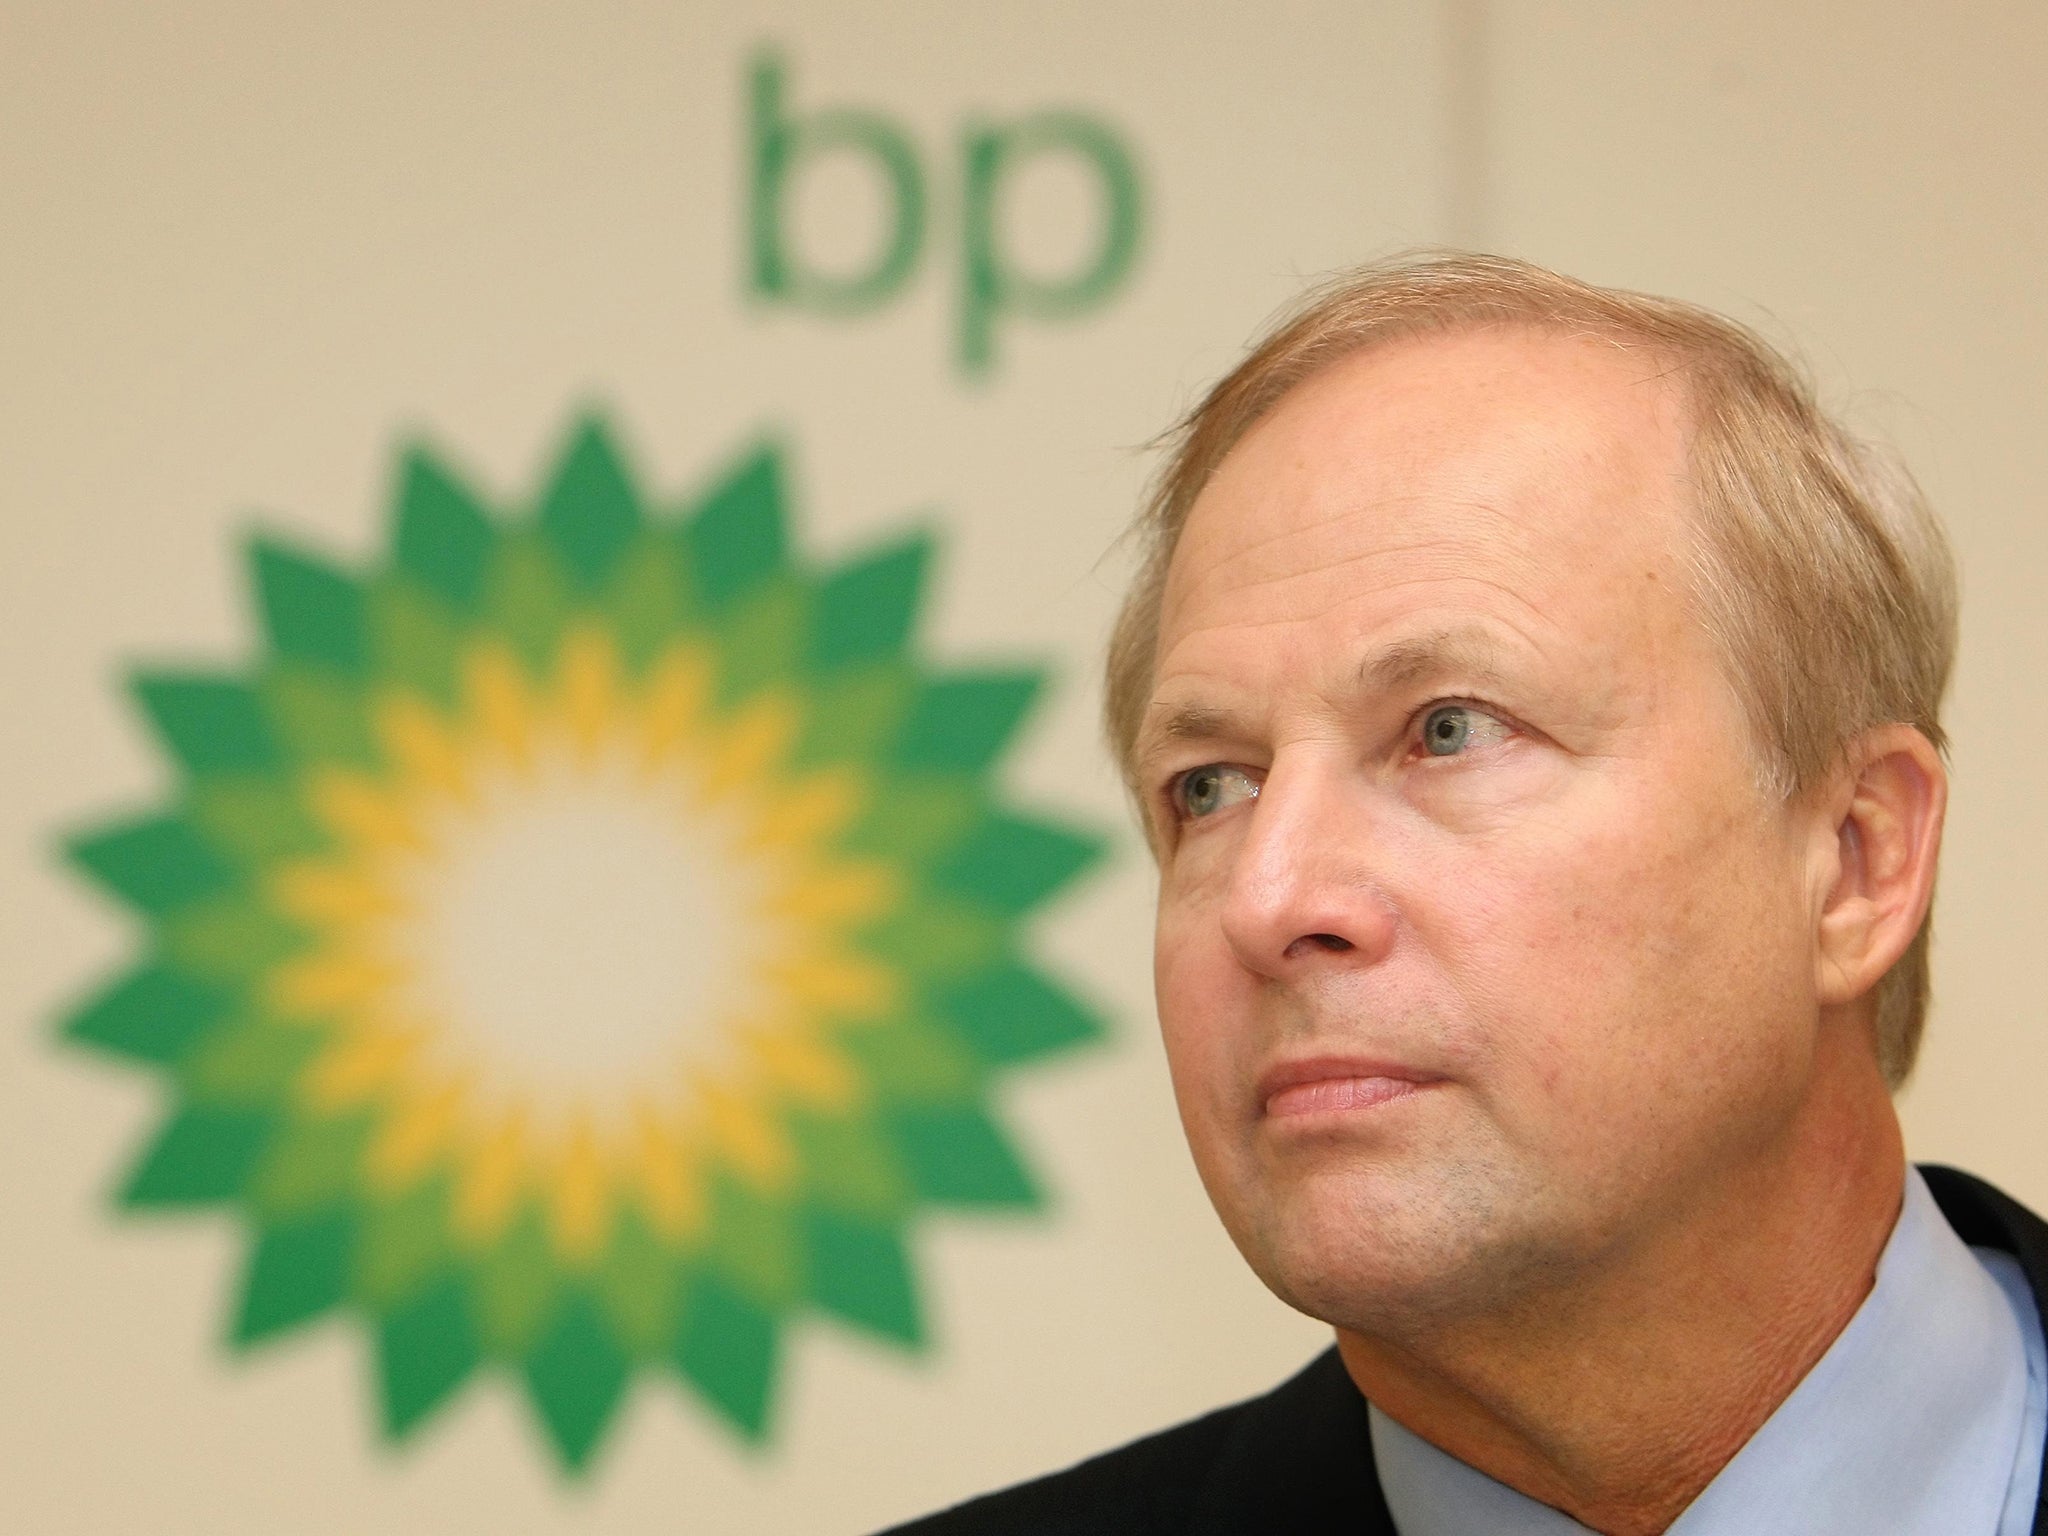 BP boss Bob Dudley: His pay in 2015 resulted in the company suffering a rare defeat at its AGM